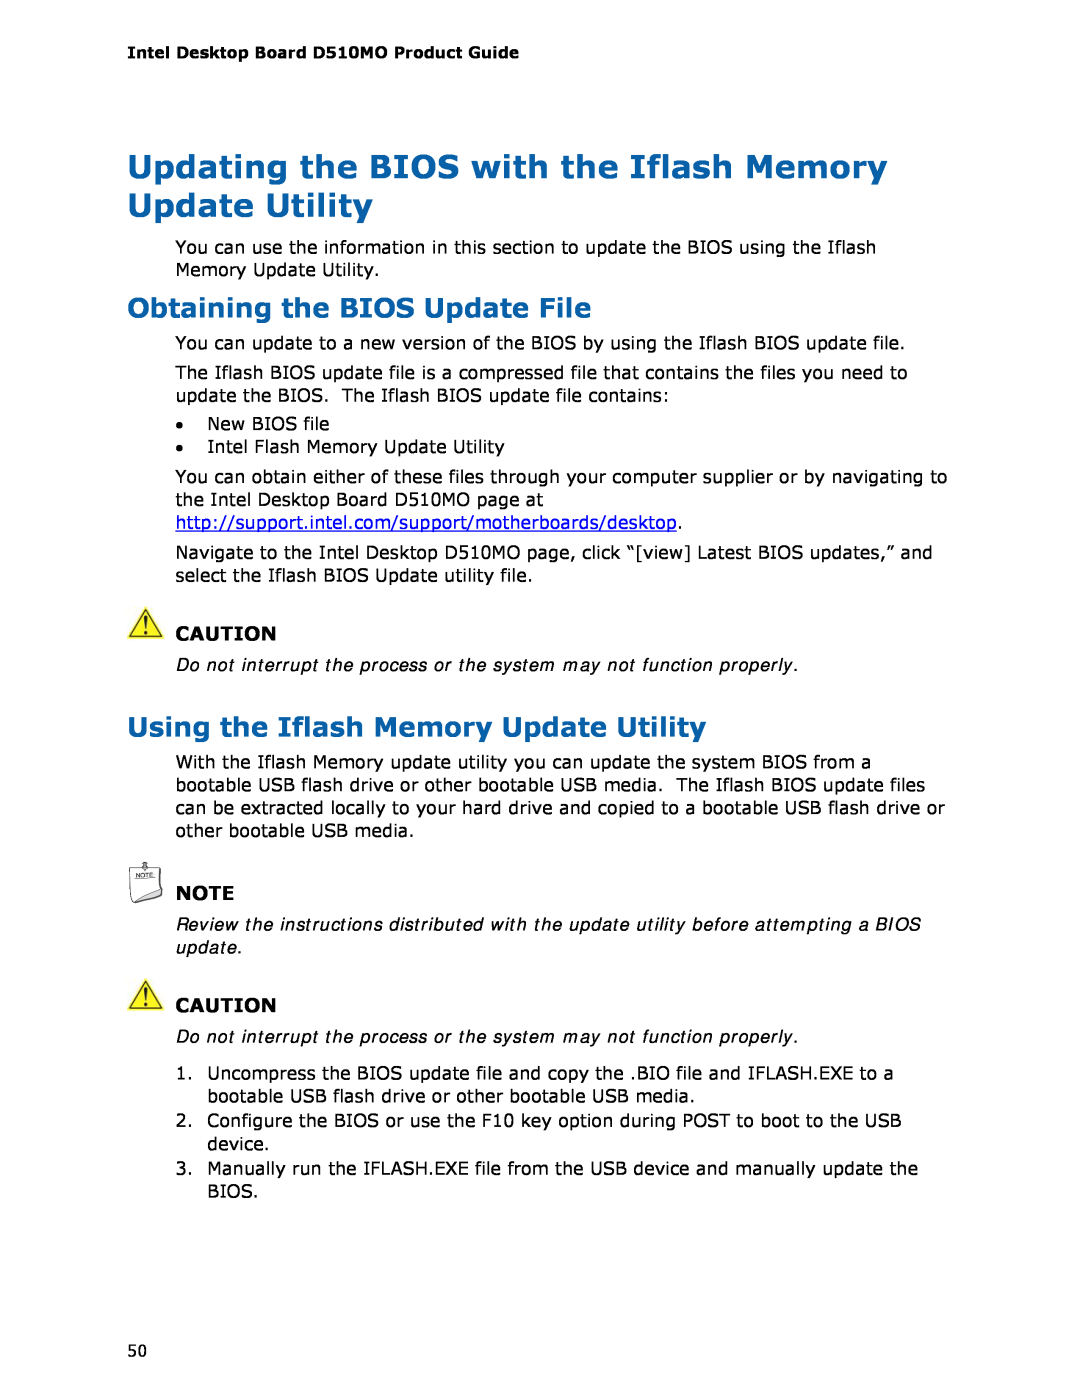 Intel D510MO manual Updating the BIOS with the Iflash Memory Update Utility, Obtaining the BIOS Update File 